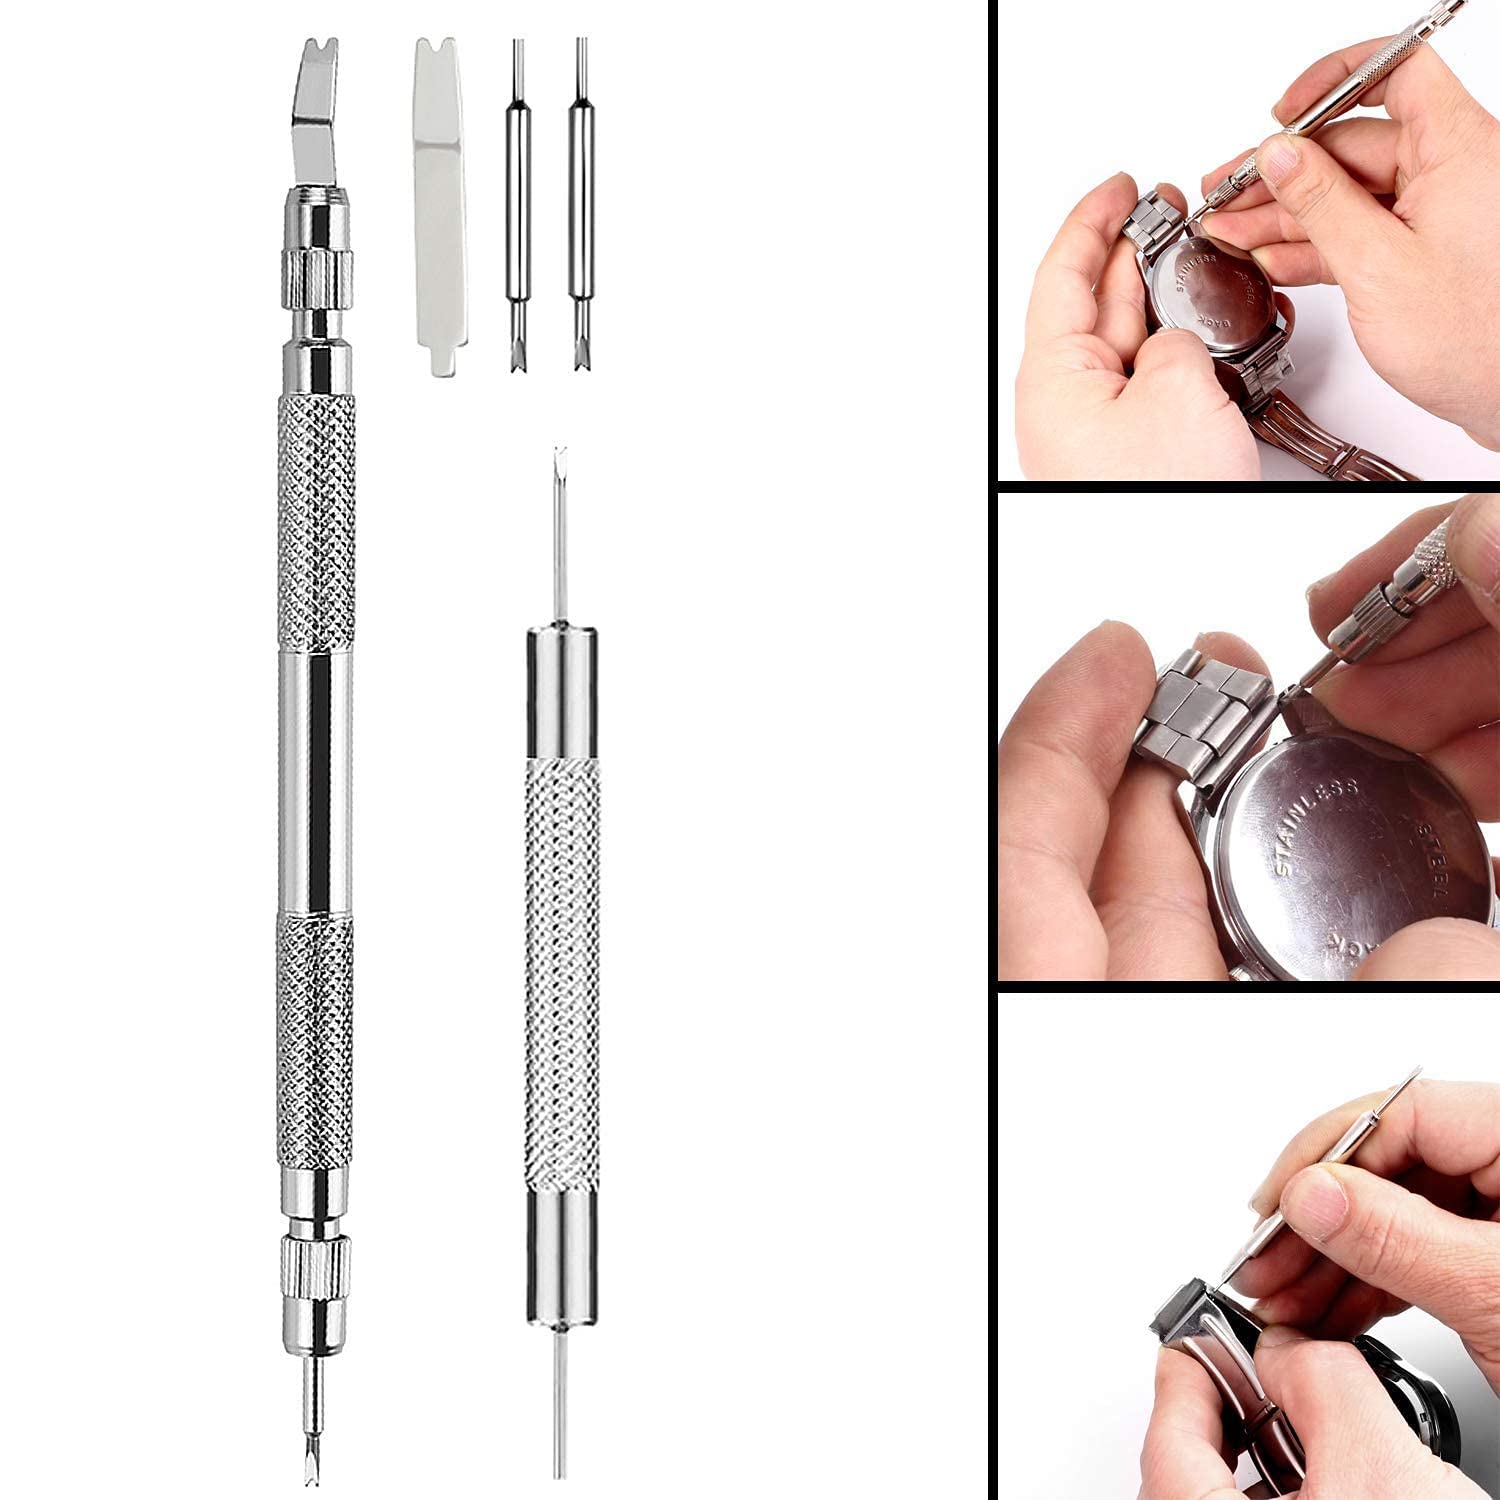 Watch Repair Kit, Professional Watch Band Link Removal Tool, Watch Battery Replacement Tools, Spring Bar Tool Set with Carrying Case